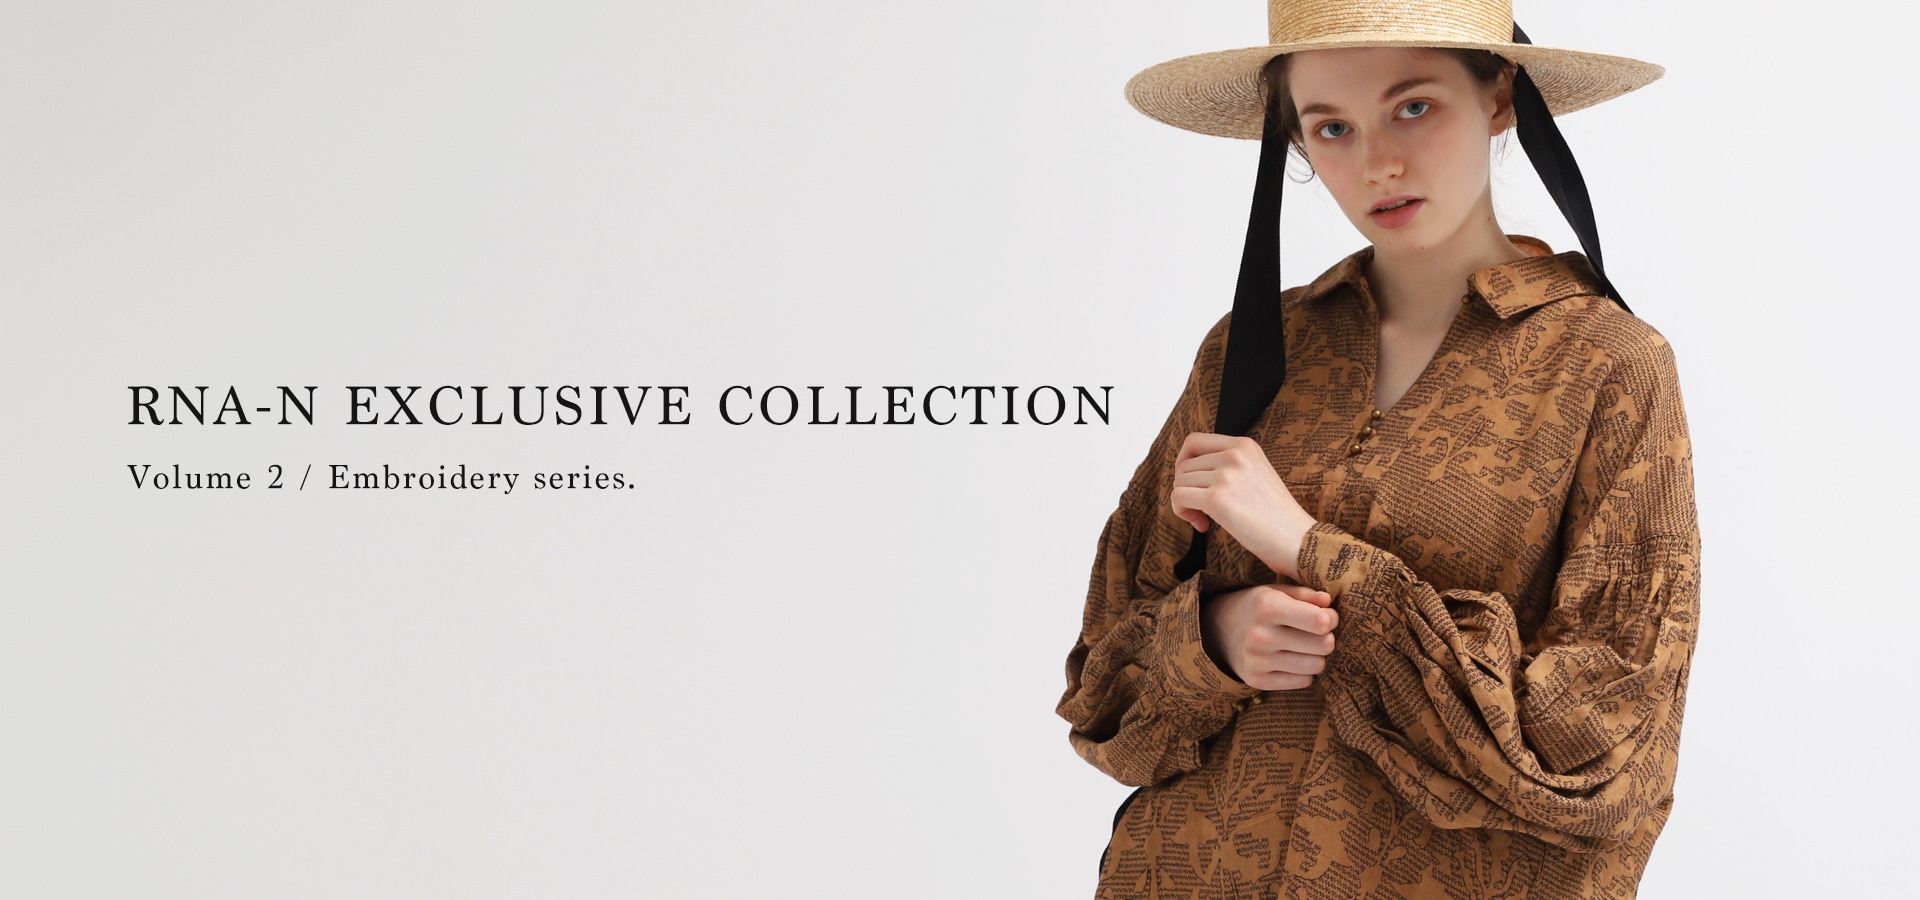 RNA-N EXCLUSIVE COLLECTION 2